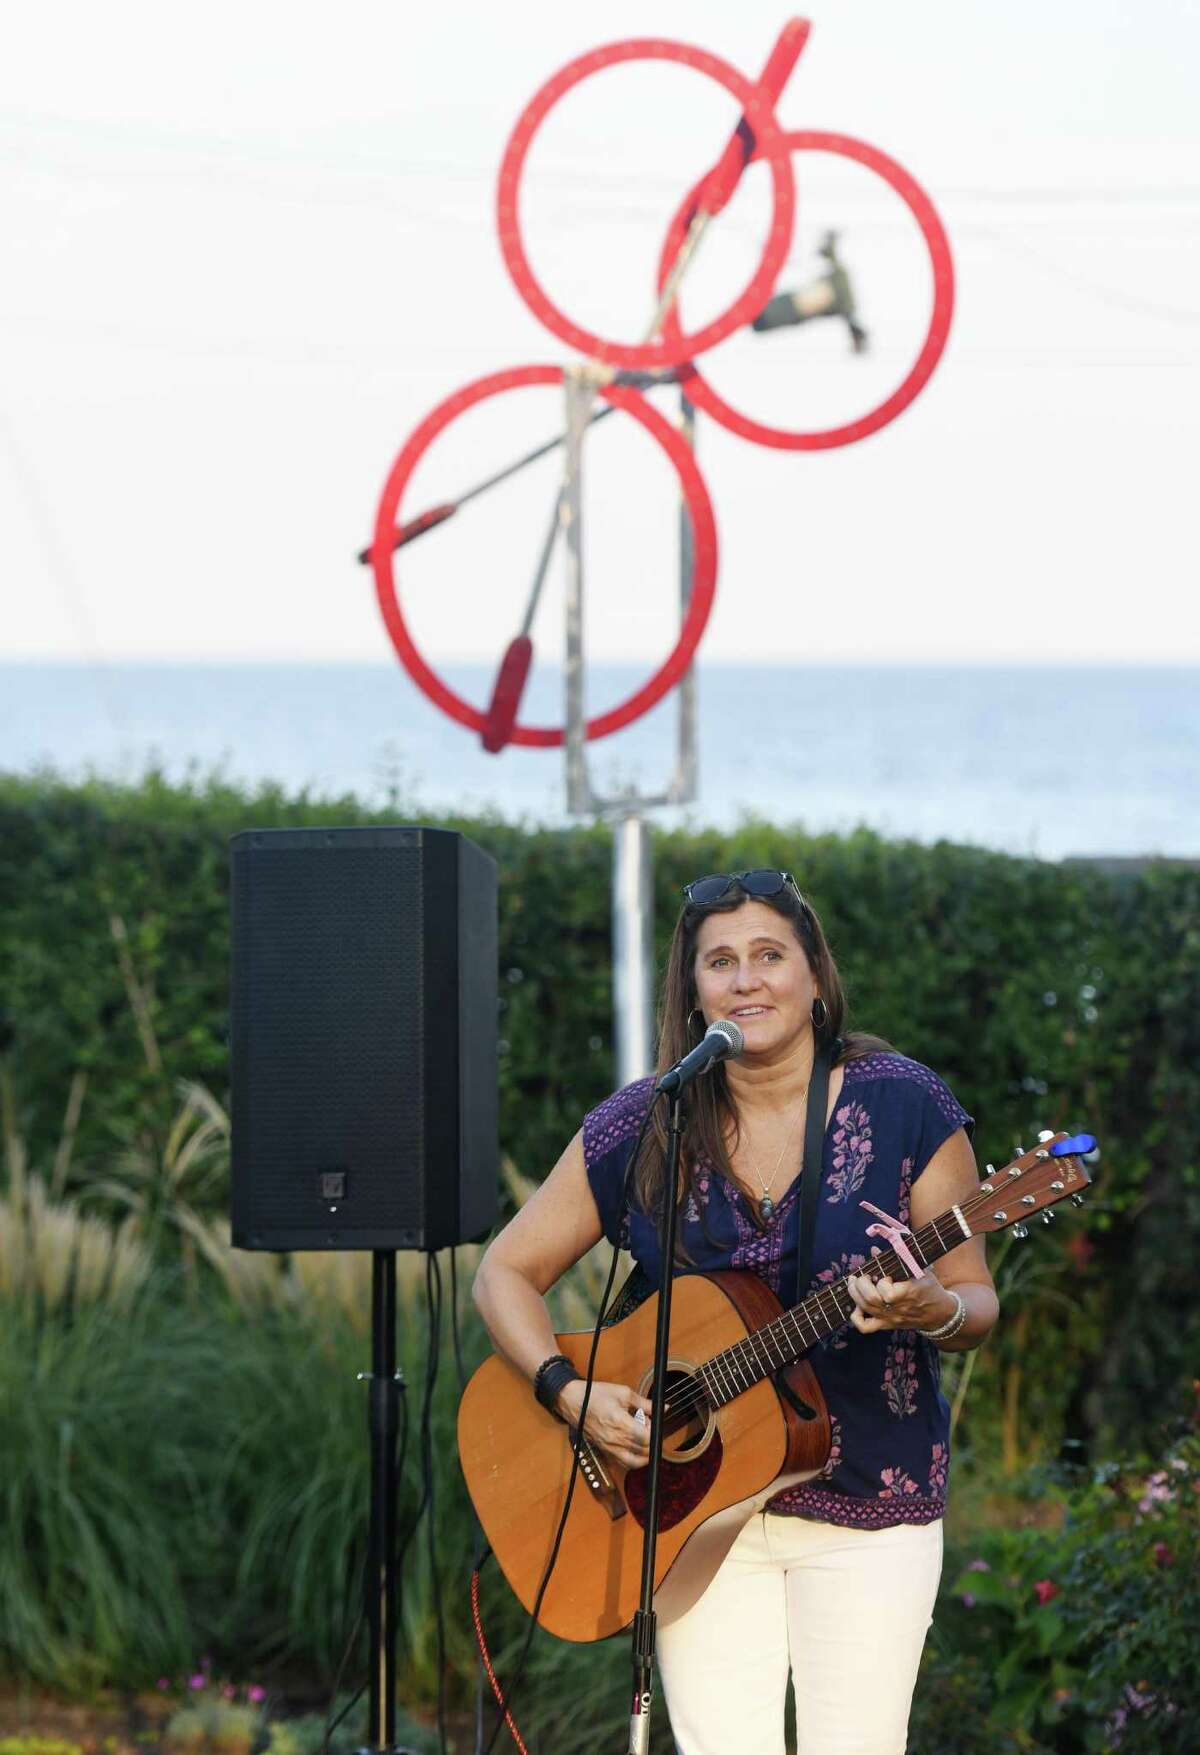 Lizzie Swan performs a song by Warren Zevon during the "Three Souls" wind sculpture dedication at the home of Steve Loeb at the end of Shippan Avenue in Stamford, Conn. Sunday, Sept. 22, 2019. Loeb purchased the land on Shippan Point where Madonna Badger's house burned down in 2011, killing her parents and three daughters and dedicated the wind sculpture in honor of the three young children killed in the fire. It has one ring for Lily Badger, who was 9 when she died, and two smaller rings for her twin sisters, Grace and Sarah, who were 7. The ceremony was attended by about 100 neighbors and friends as Loeb recalled memories of his son playing with the children in the house next door. Rabbi Debra Salomon and musician Lizzie Swan said a prayer and performed a song for the crowd that culminated in everybody putting their arms around their neighbors.